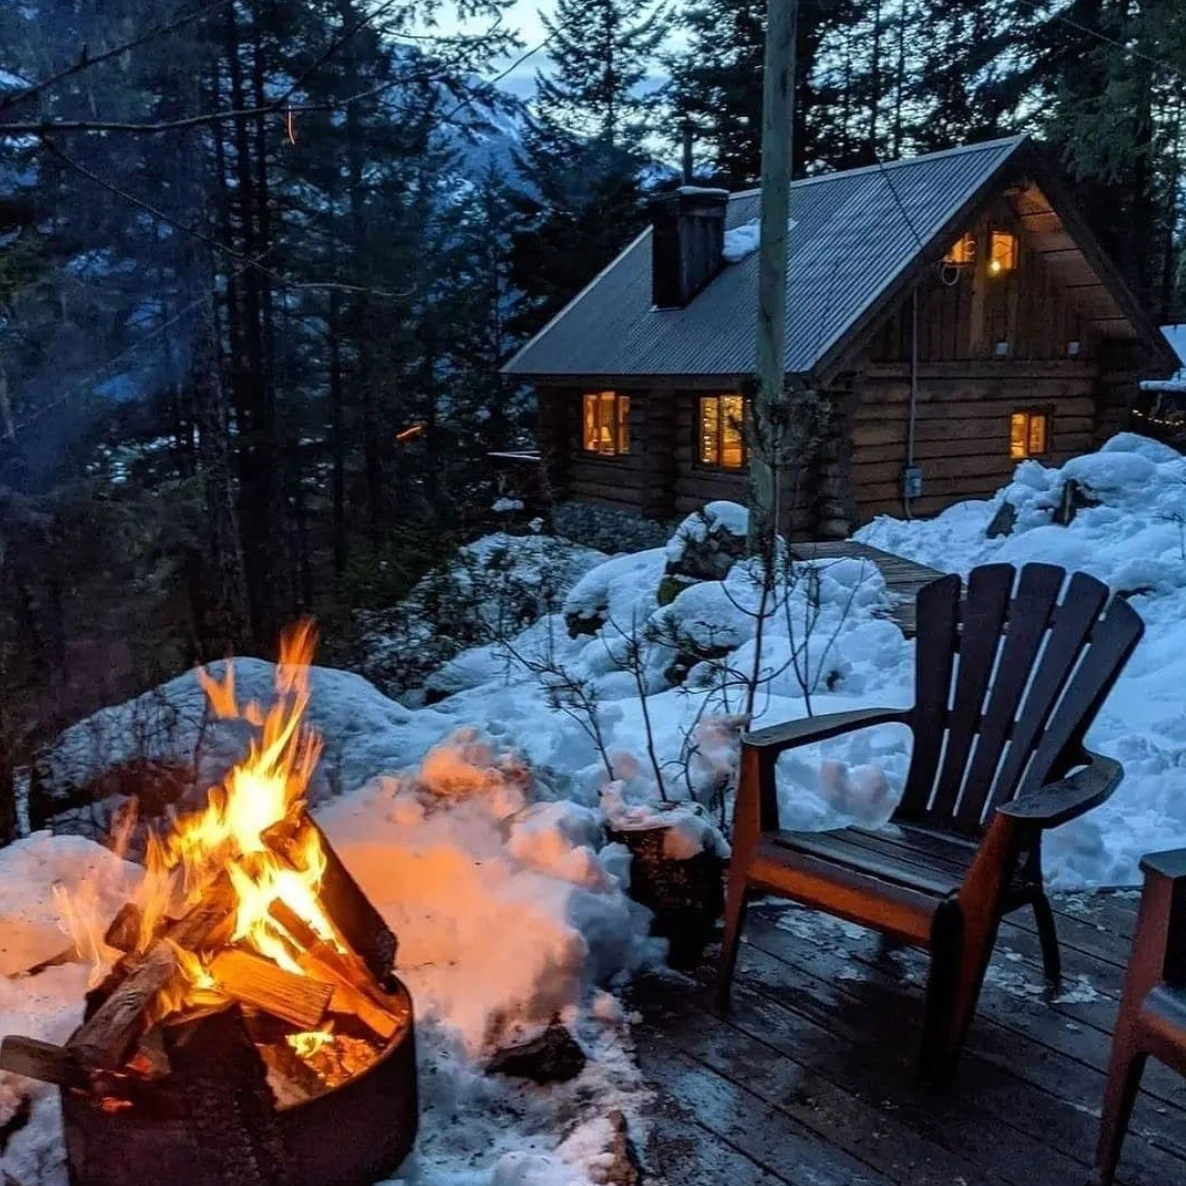 Cozy outdoor fire pit surrounded by a thick blanket of snow.